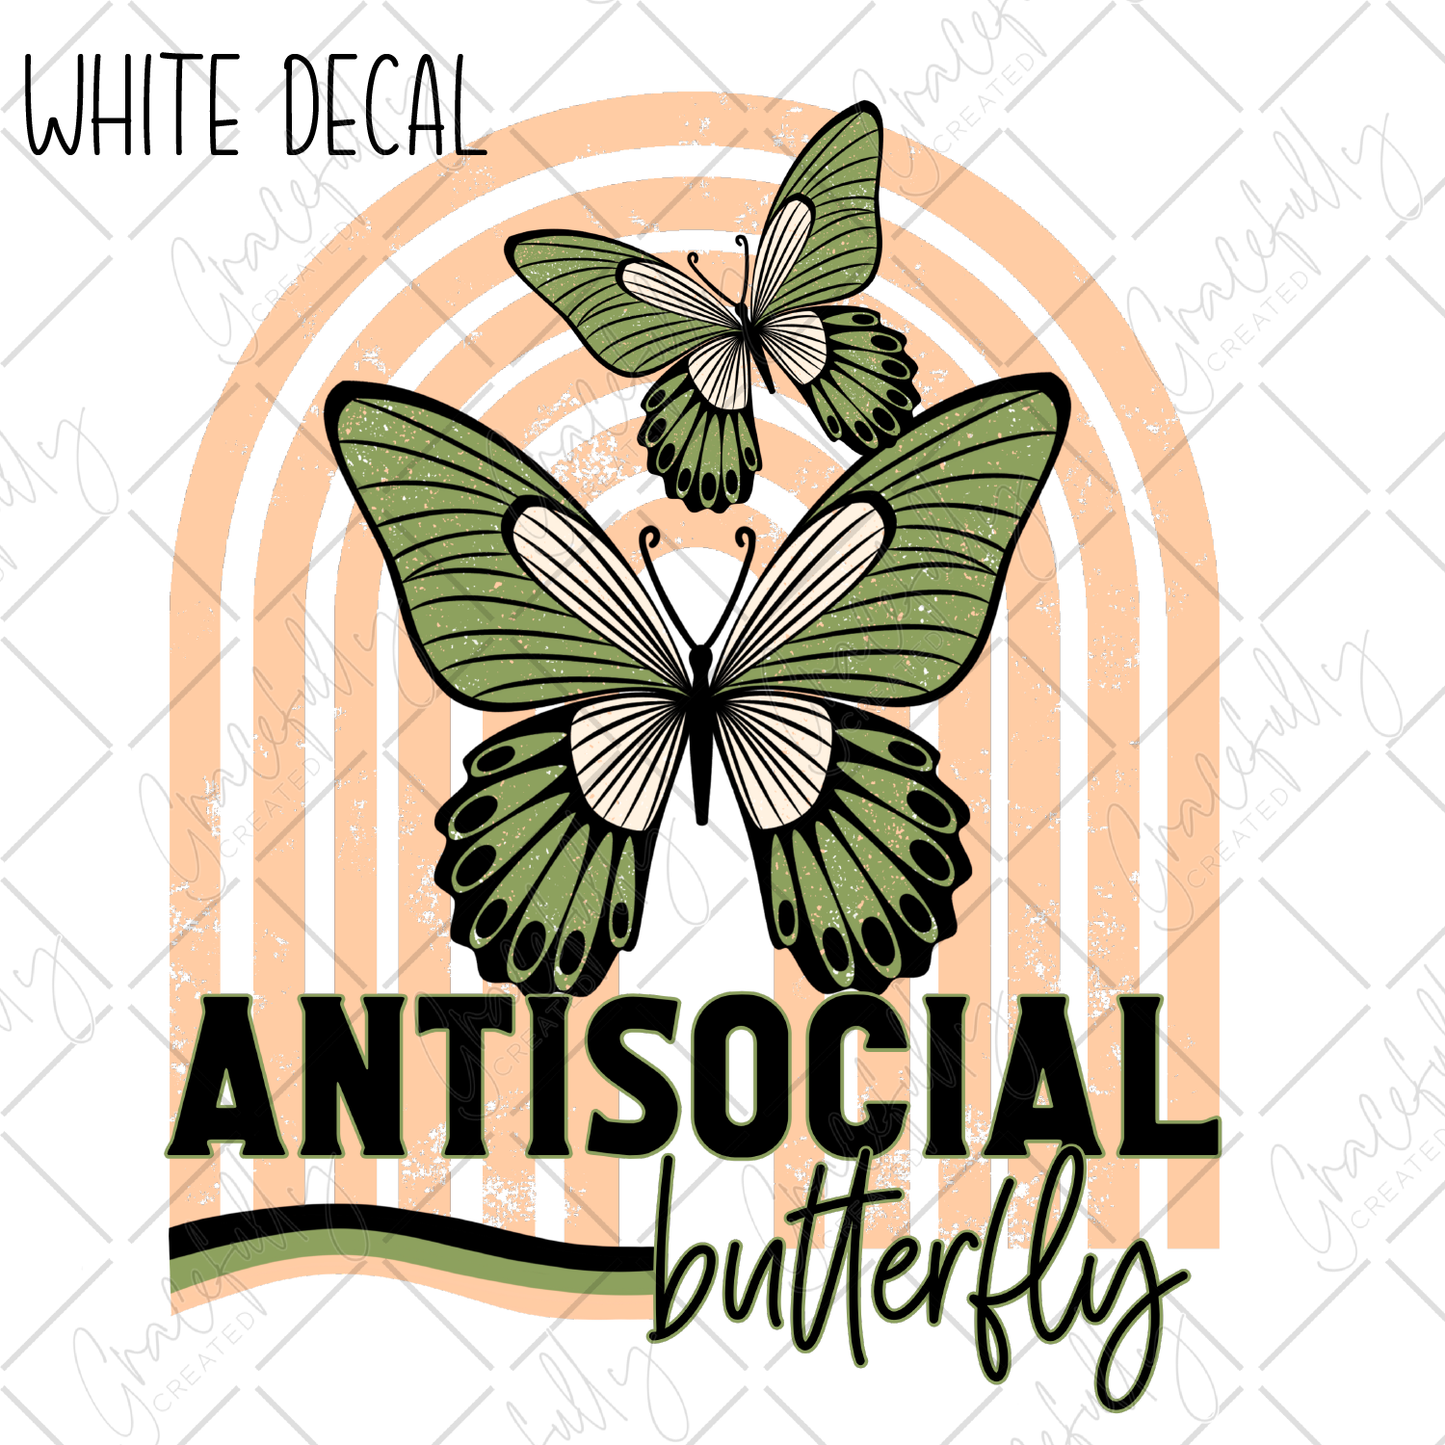 WD62 CS Antisocial Butterfly